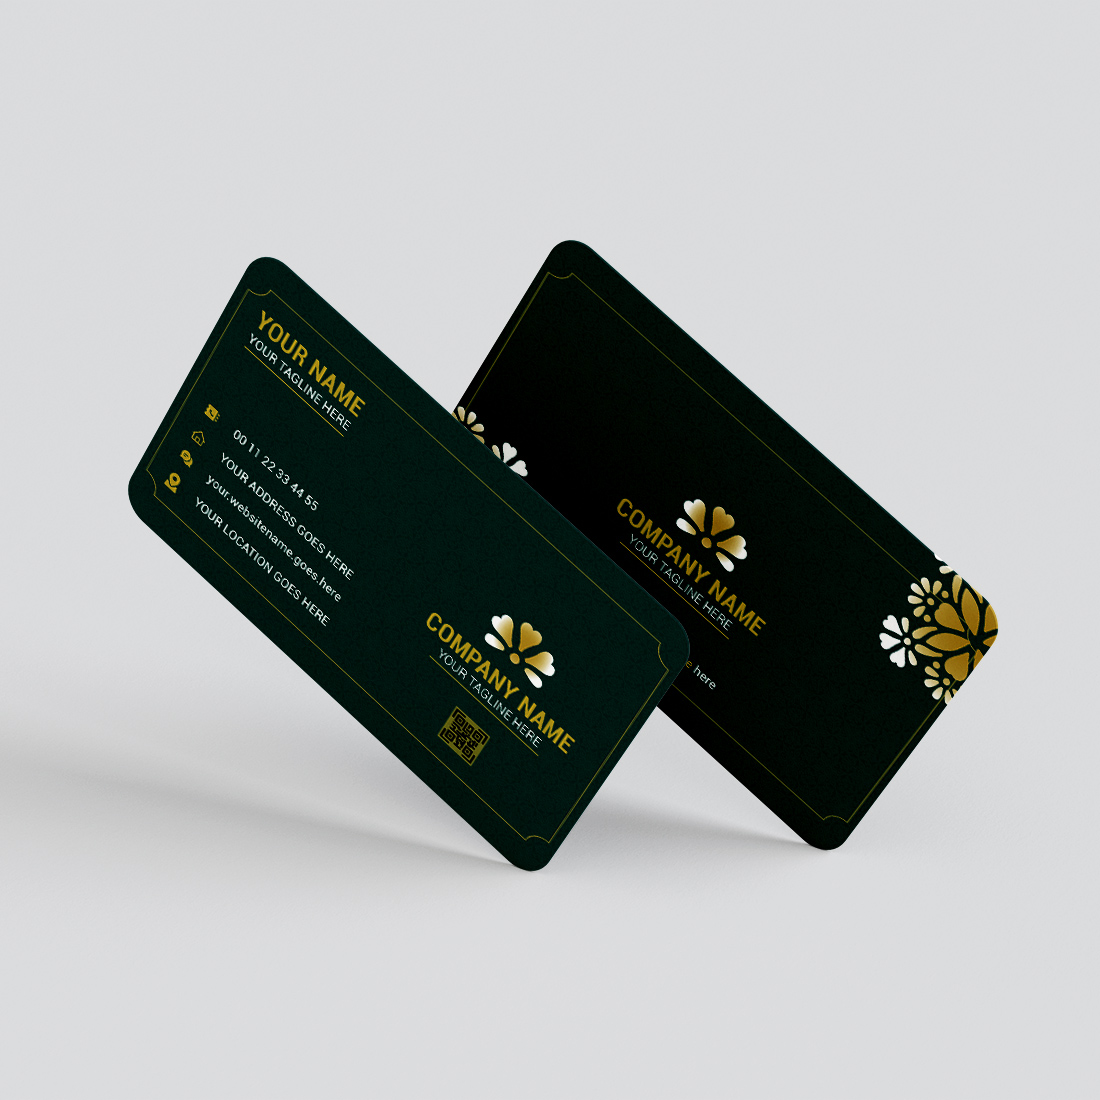 Two green business cards with gold flowers on them.